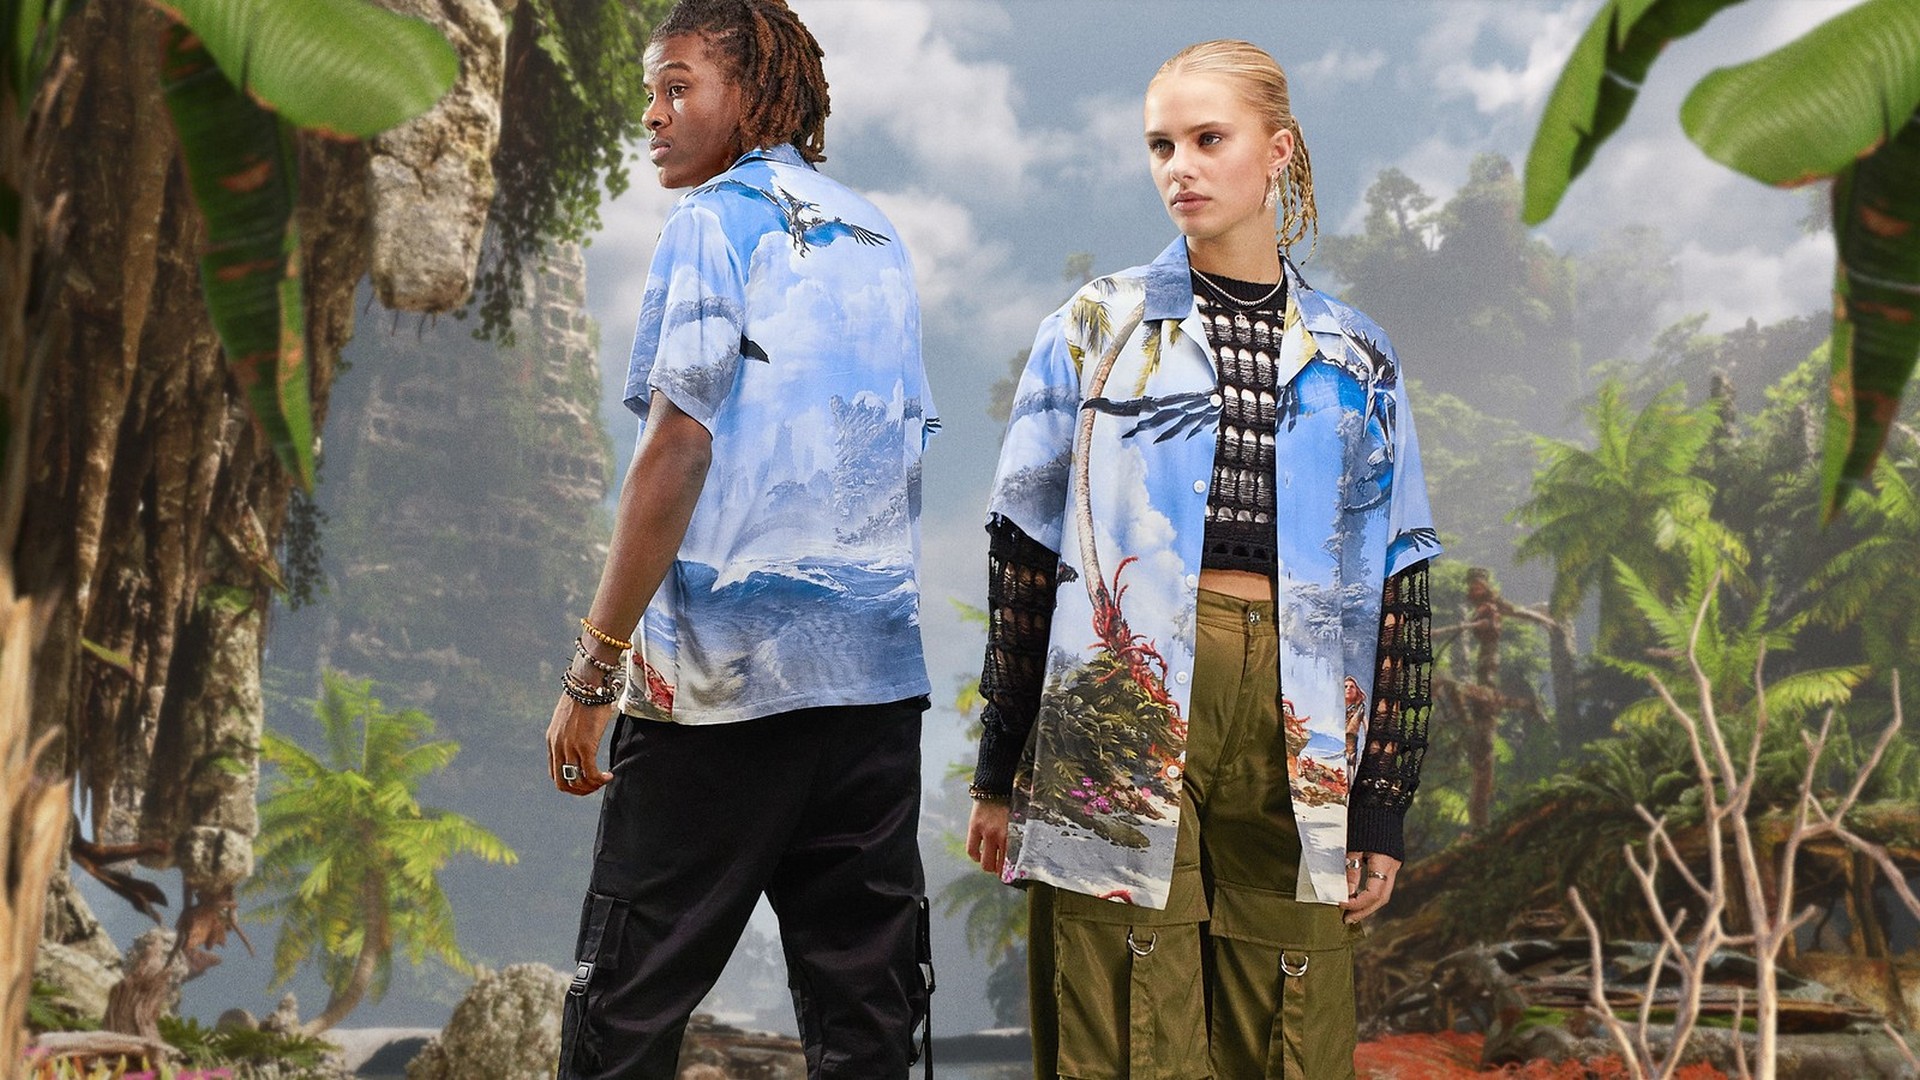 Horizon Forbidden West Inspired Unisex Gaming & Streetwear Apparel Is Available Now, Exclusively On ASOS